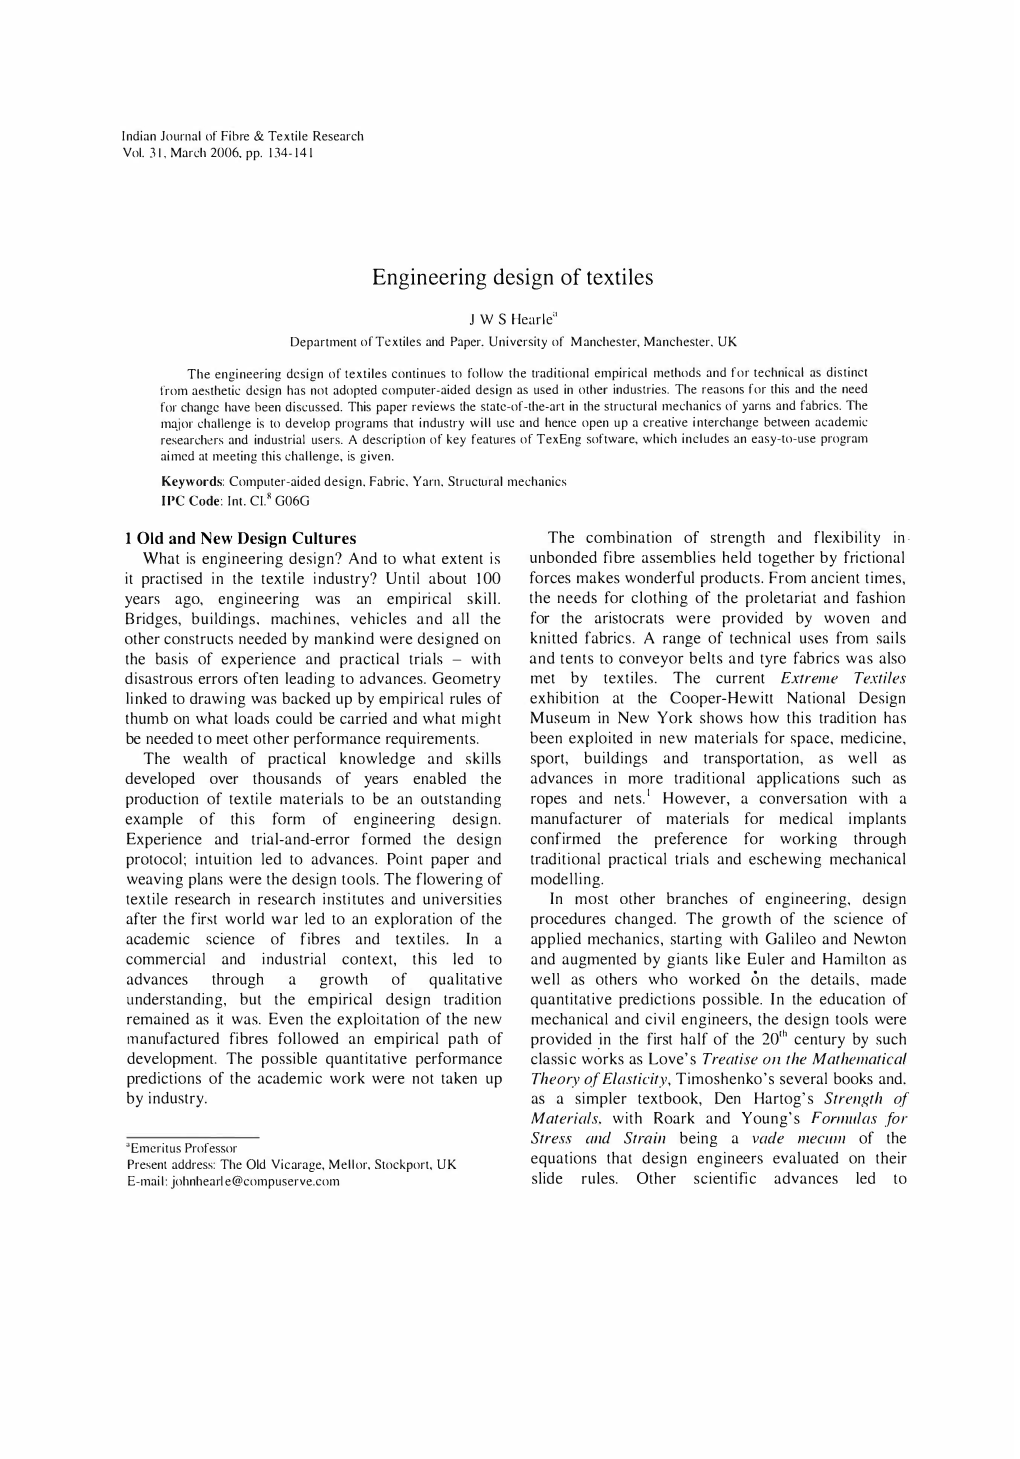 Engineering Design of Textiles Extrel1le Textiles Strength Of